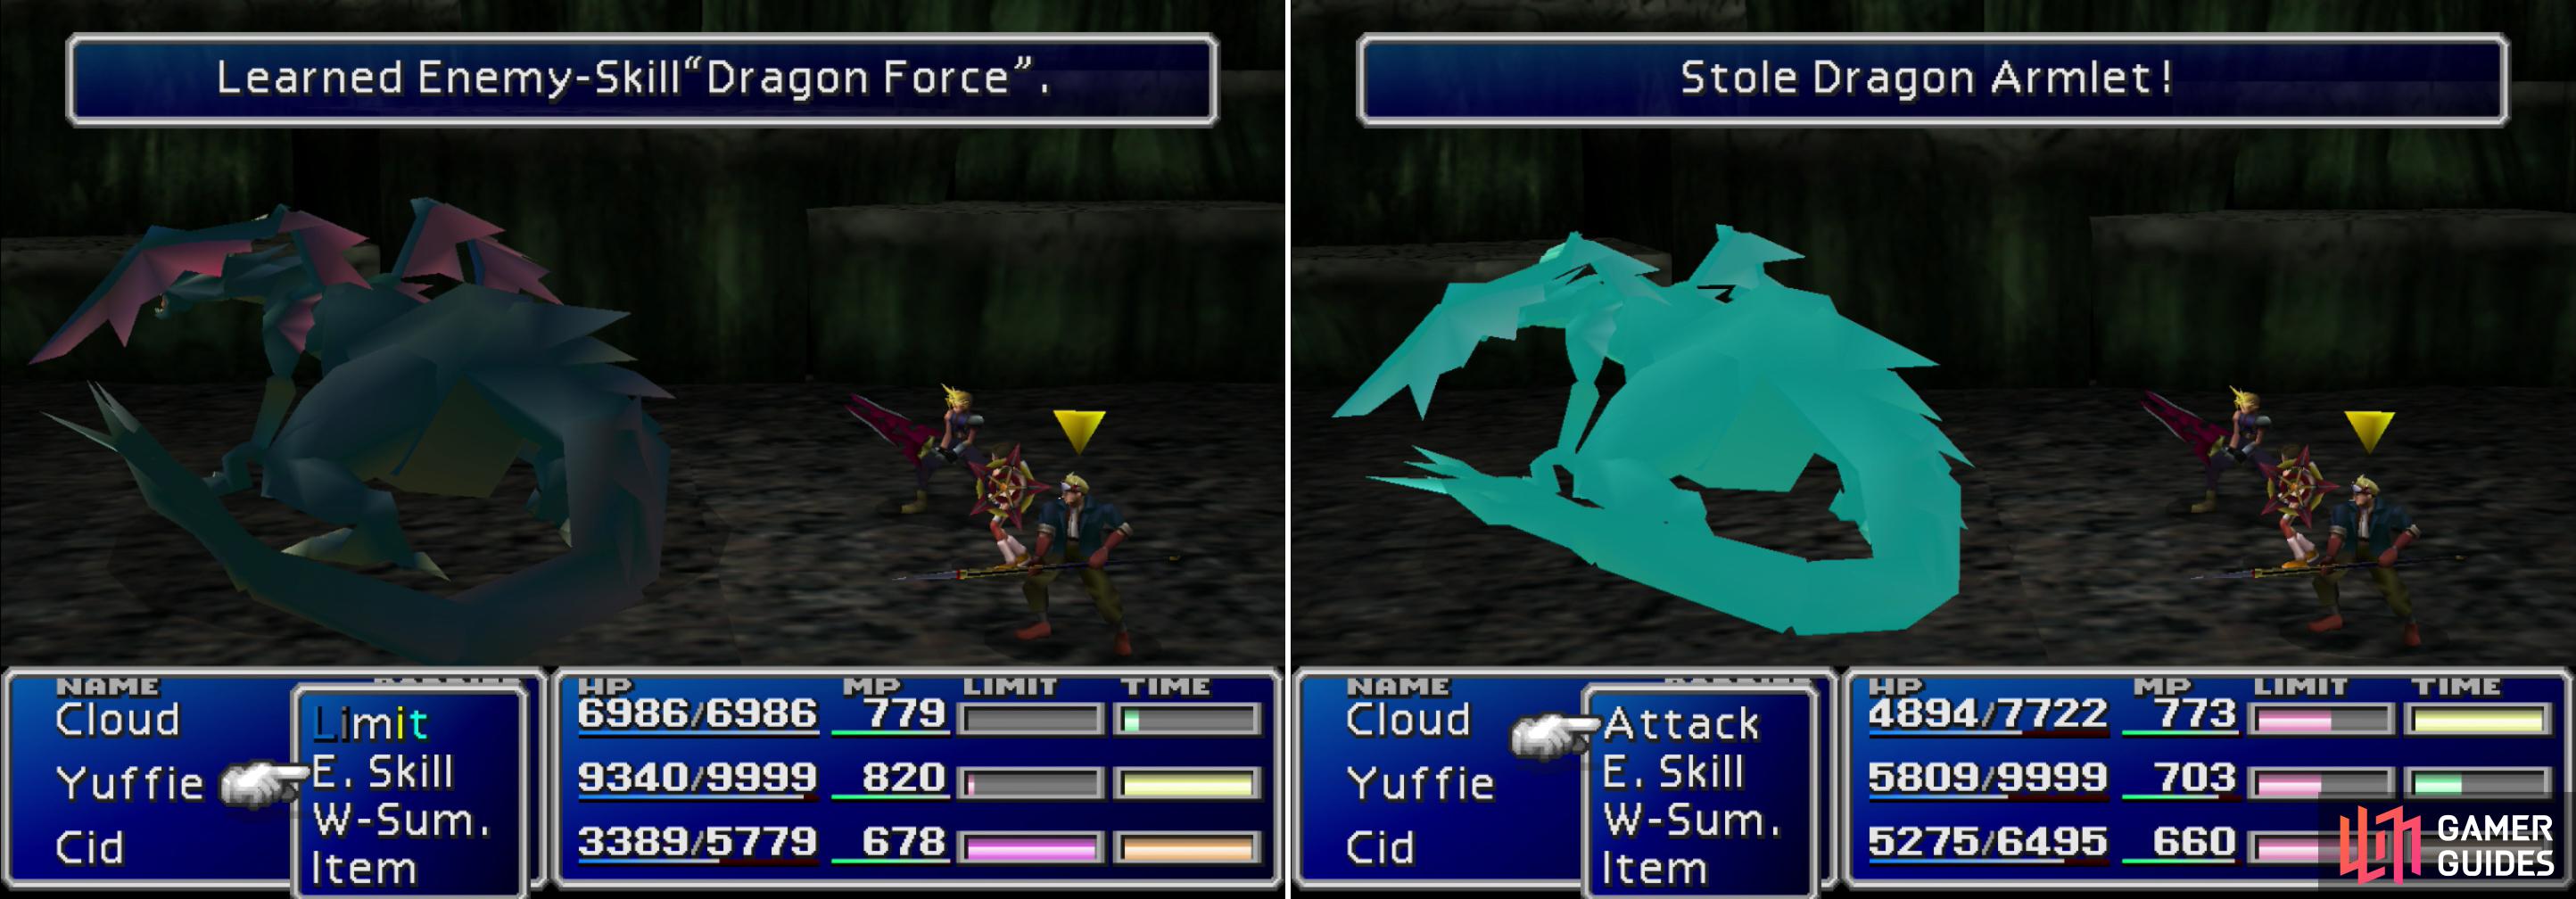 You can learn the “Dragon Force” and “Laser” Enemy Skills from Dark Dragons (left), you can also steal Dragon Armlets from them (right).